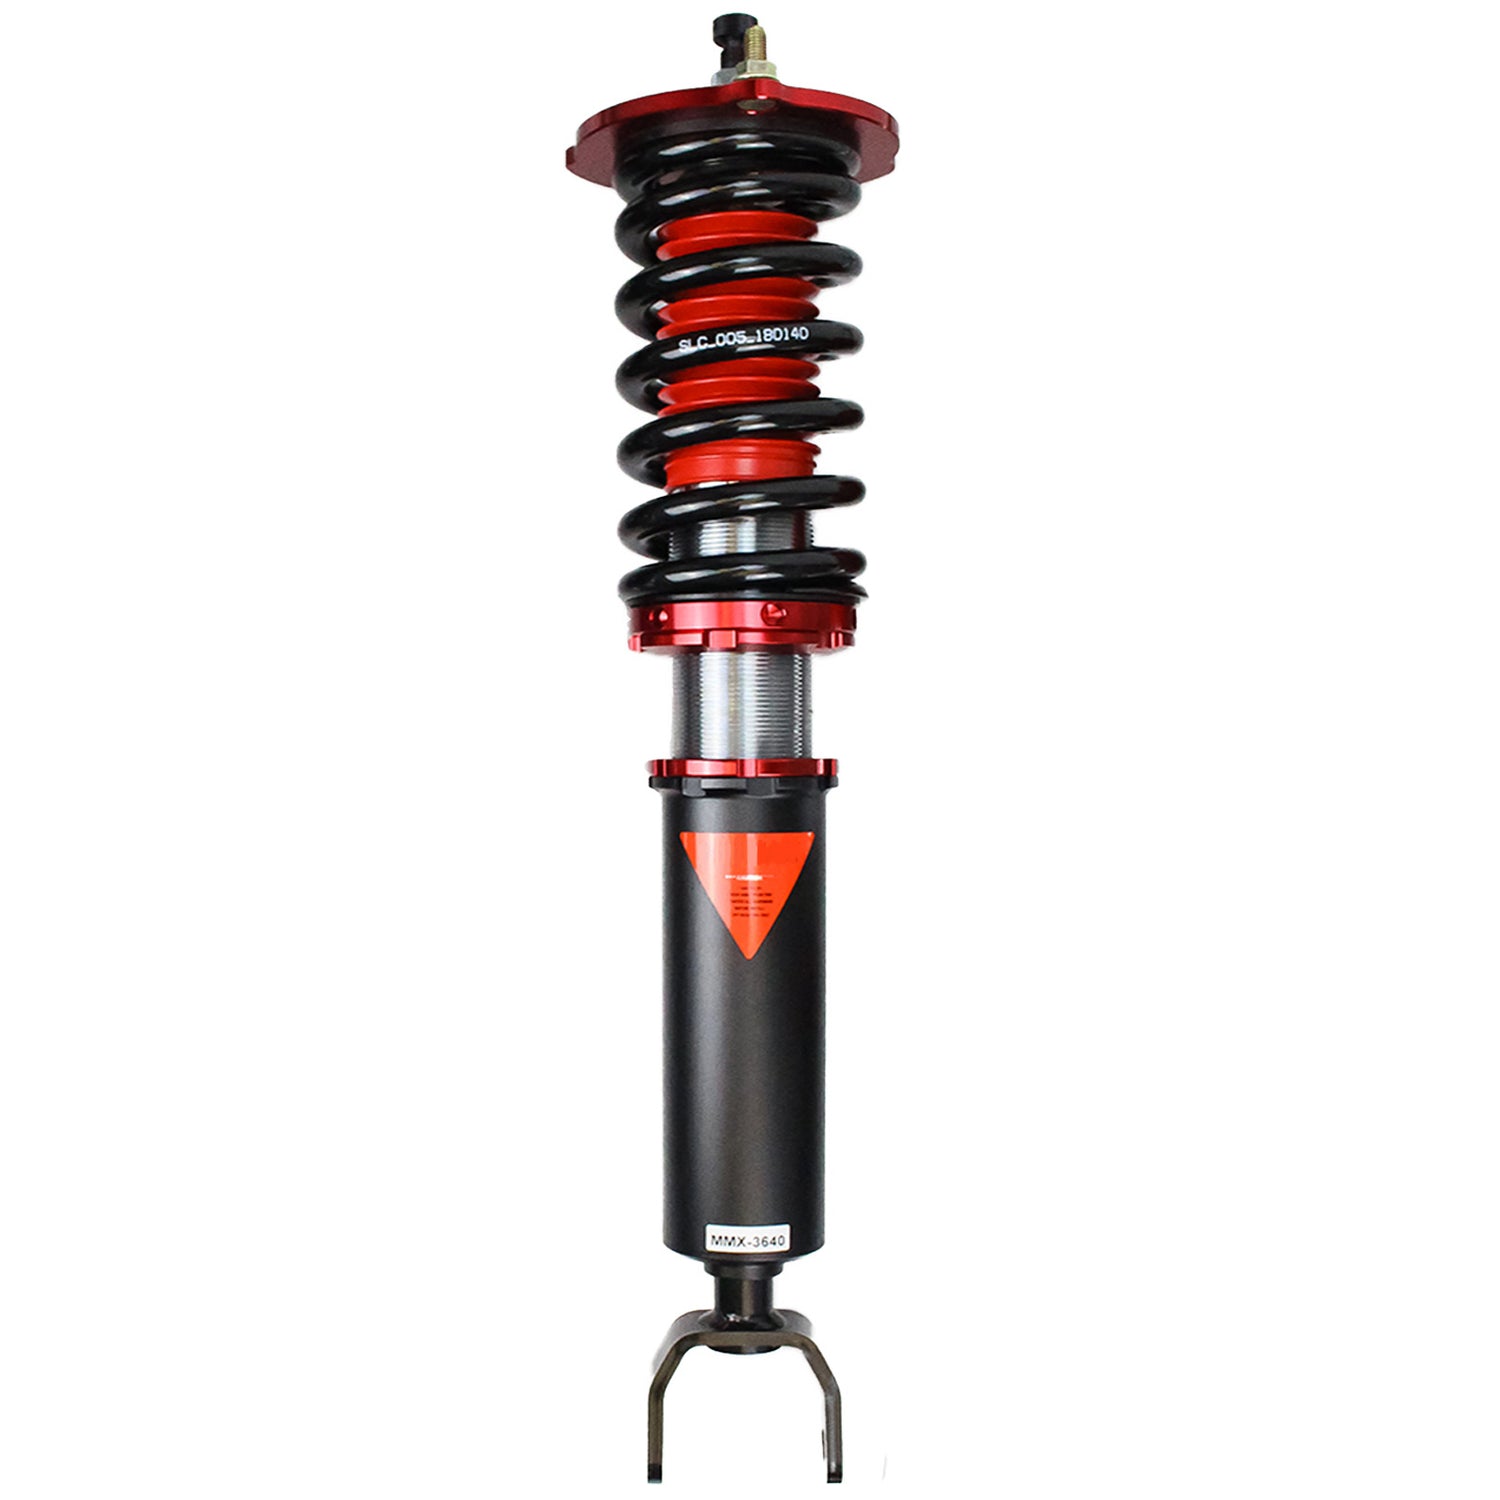 MMX3640 MAXX Coilovers Lowering Kit, Fully Adjustable, Ride Height, 40 Clicks Rebound Settings, Mercedes-Benz CLS(W219) 04-11